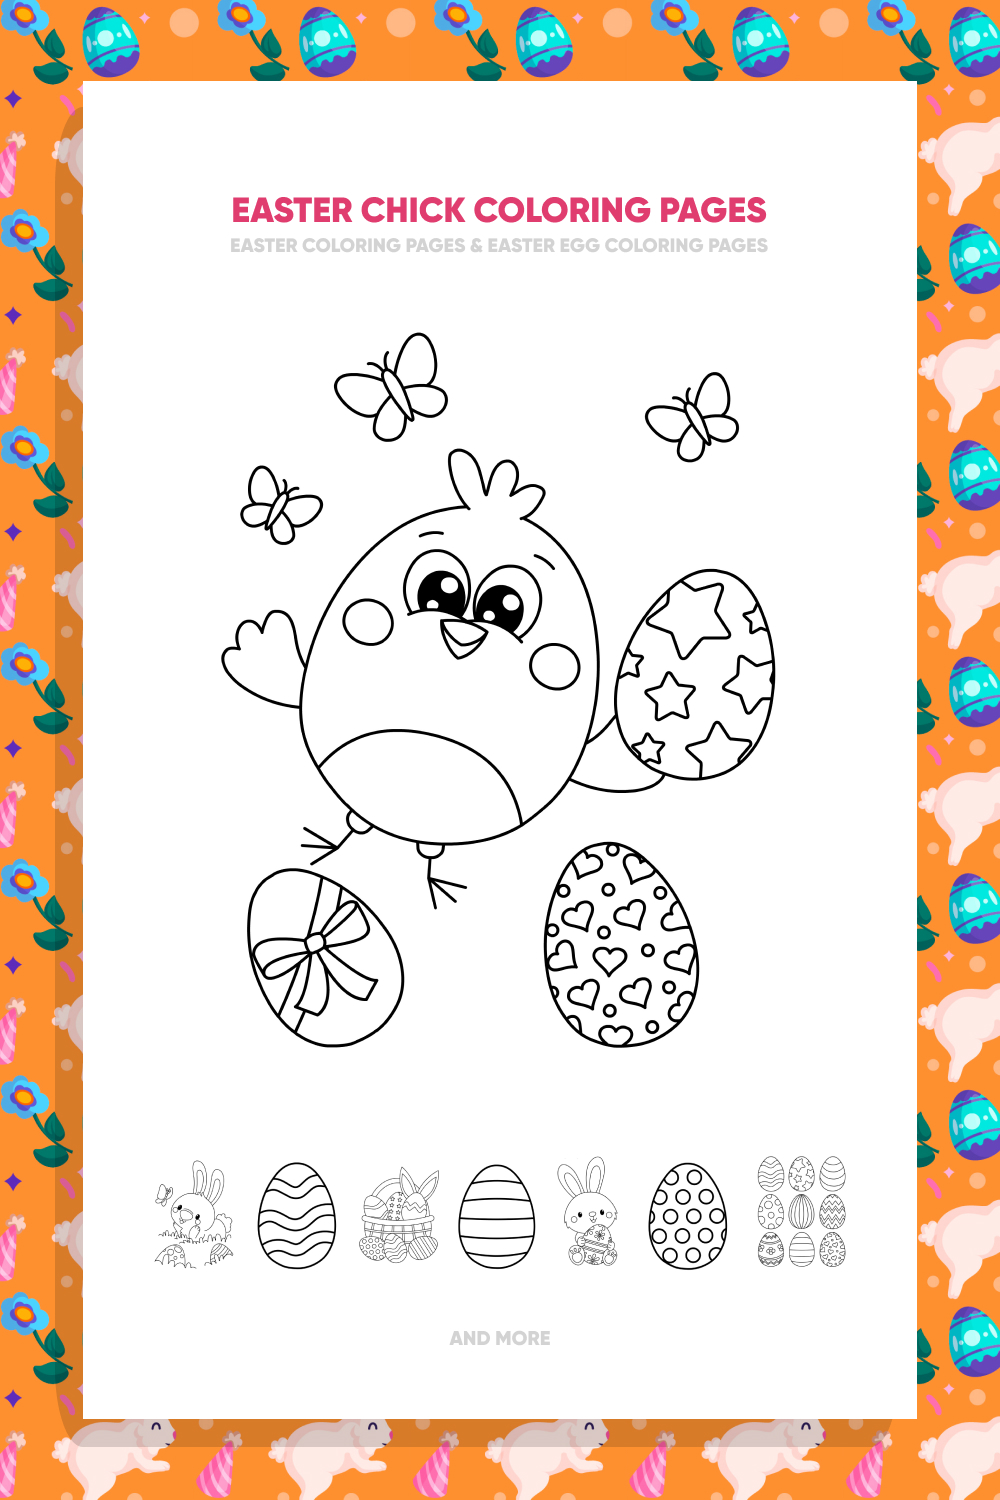 Easter Chick Coloring Pages cover image.